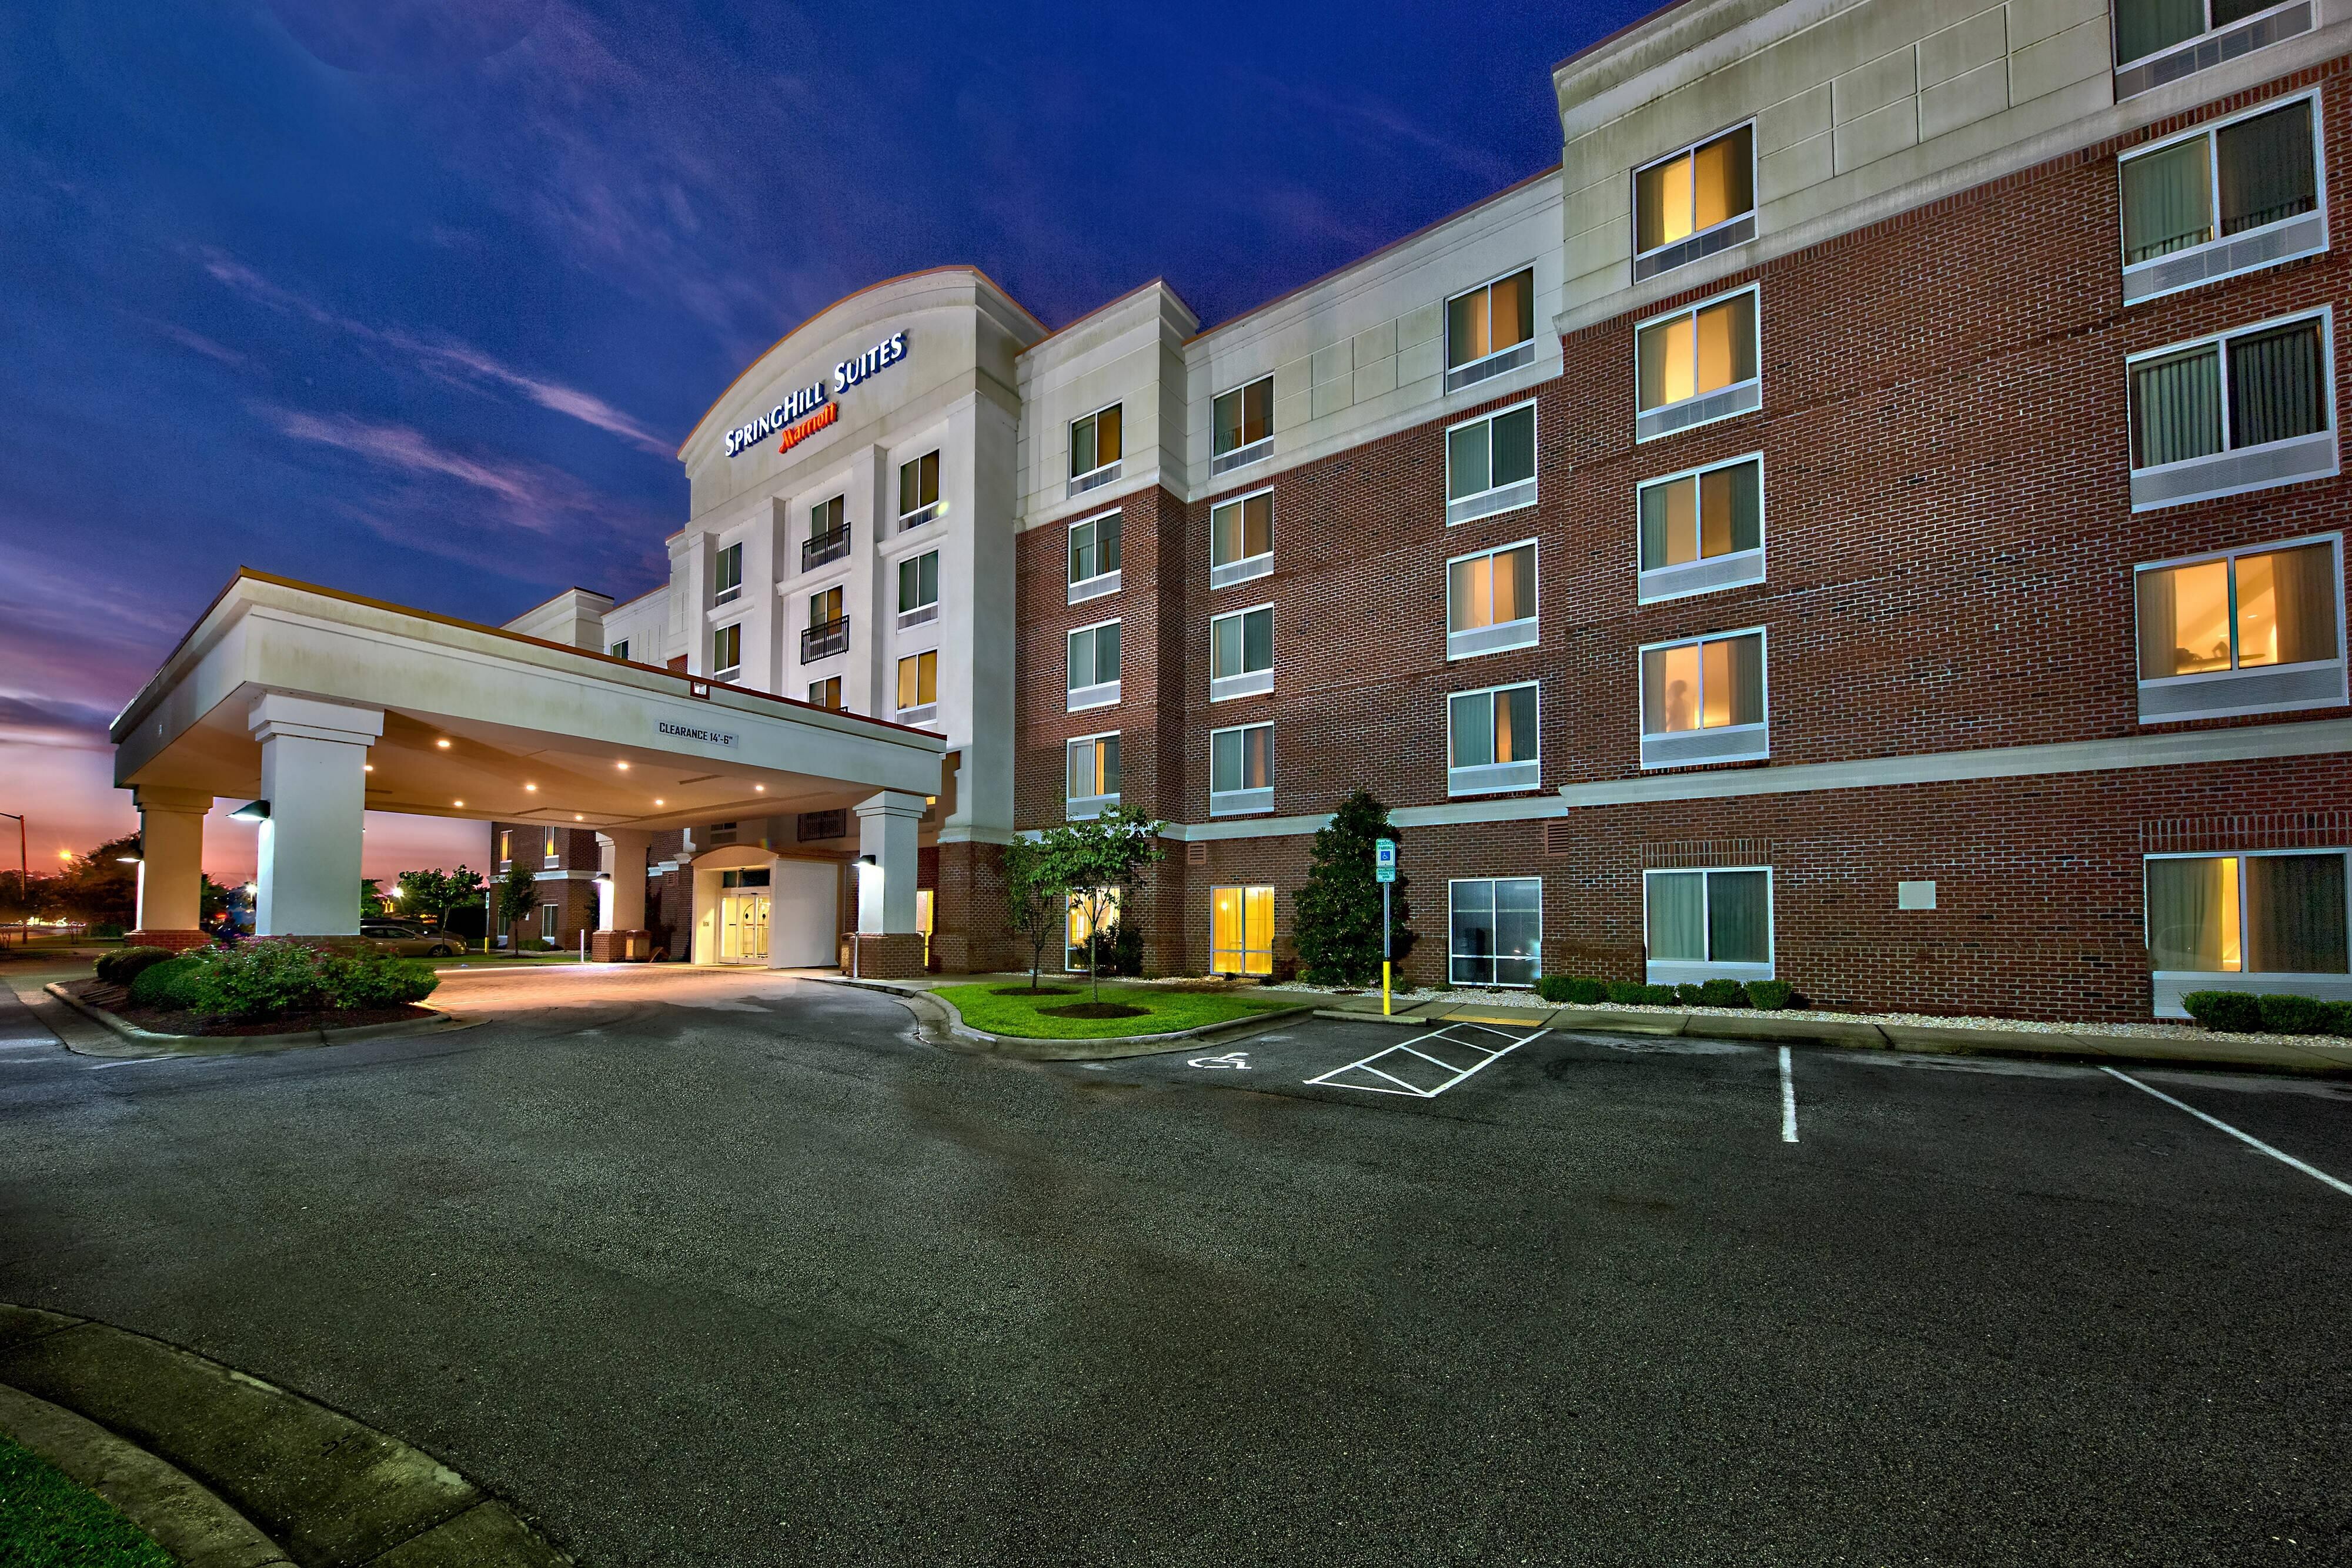 Photo of SpringHill Suites New Bern, New Bern, NC